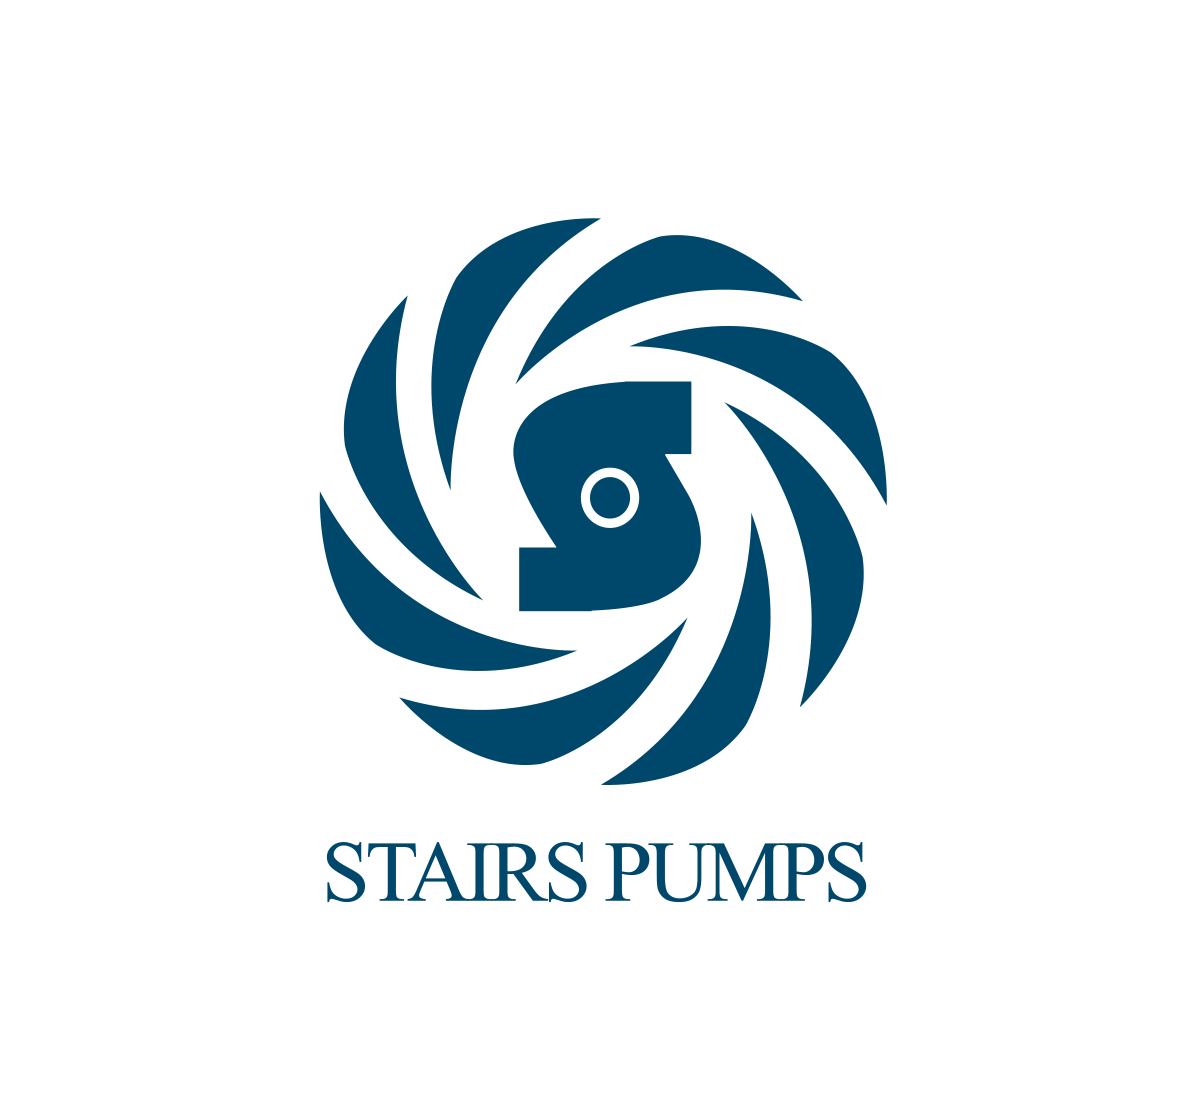 Rolo & Pereira - Stairs Pumps